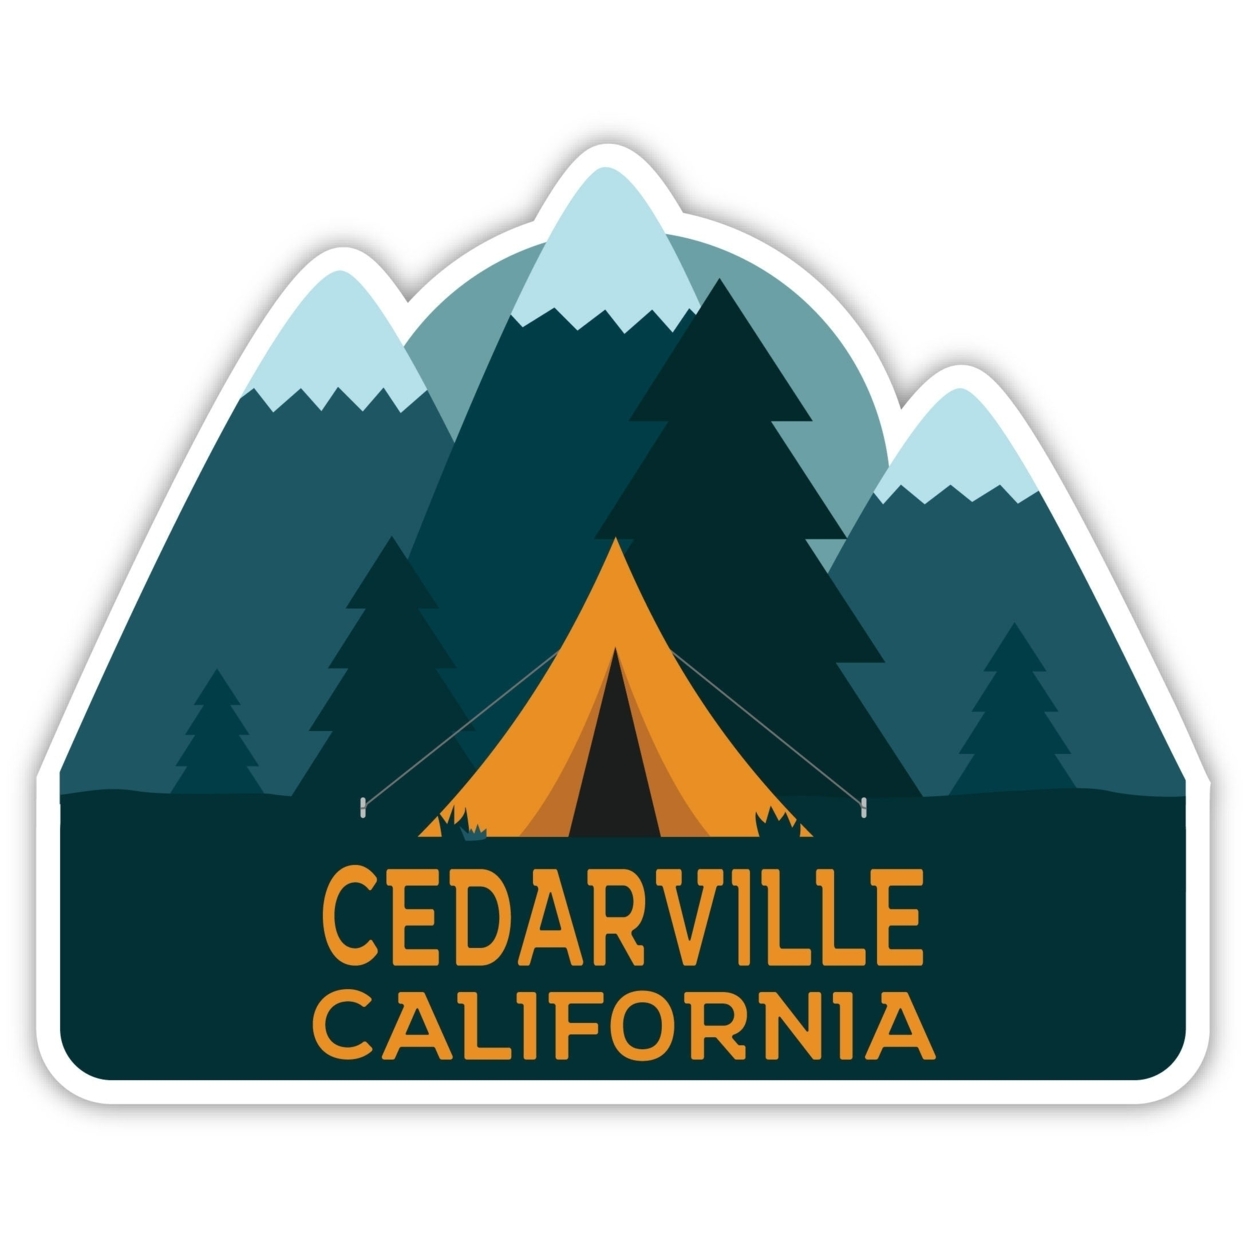 Cedarville California Souvenir Decorative Stickers (Choose Theme And Size) - 4-Pack, 2-Inch, Tent